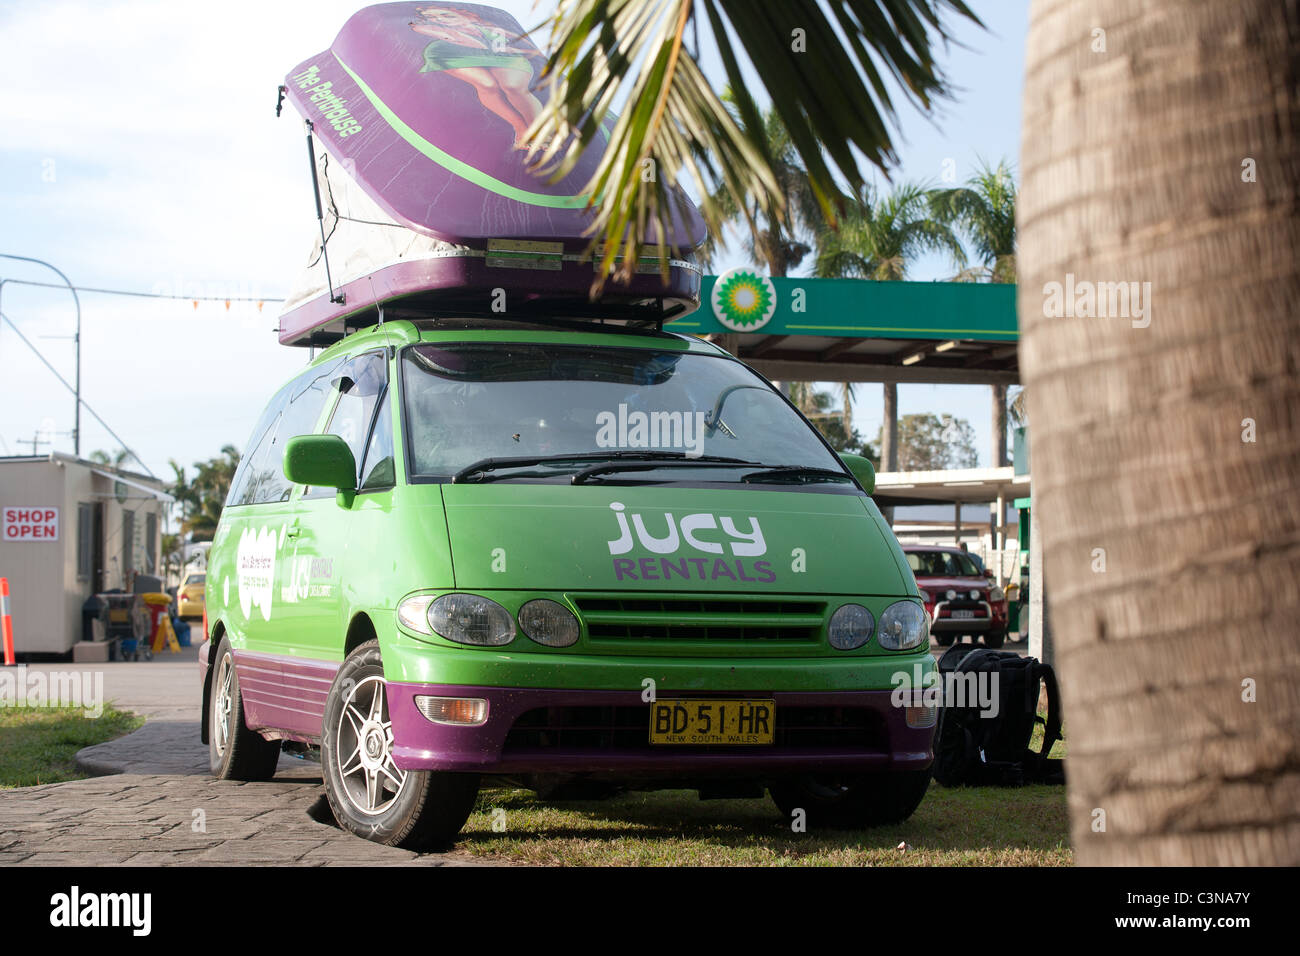 Jucy campervan parked at petroleum station. Queensland, Australia. Stock Photo